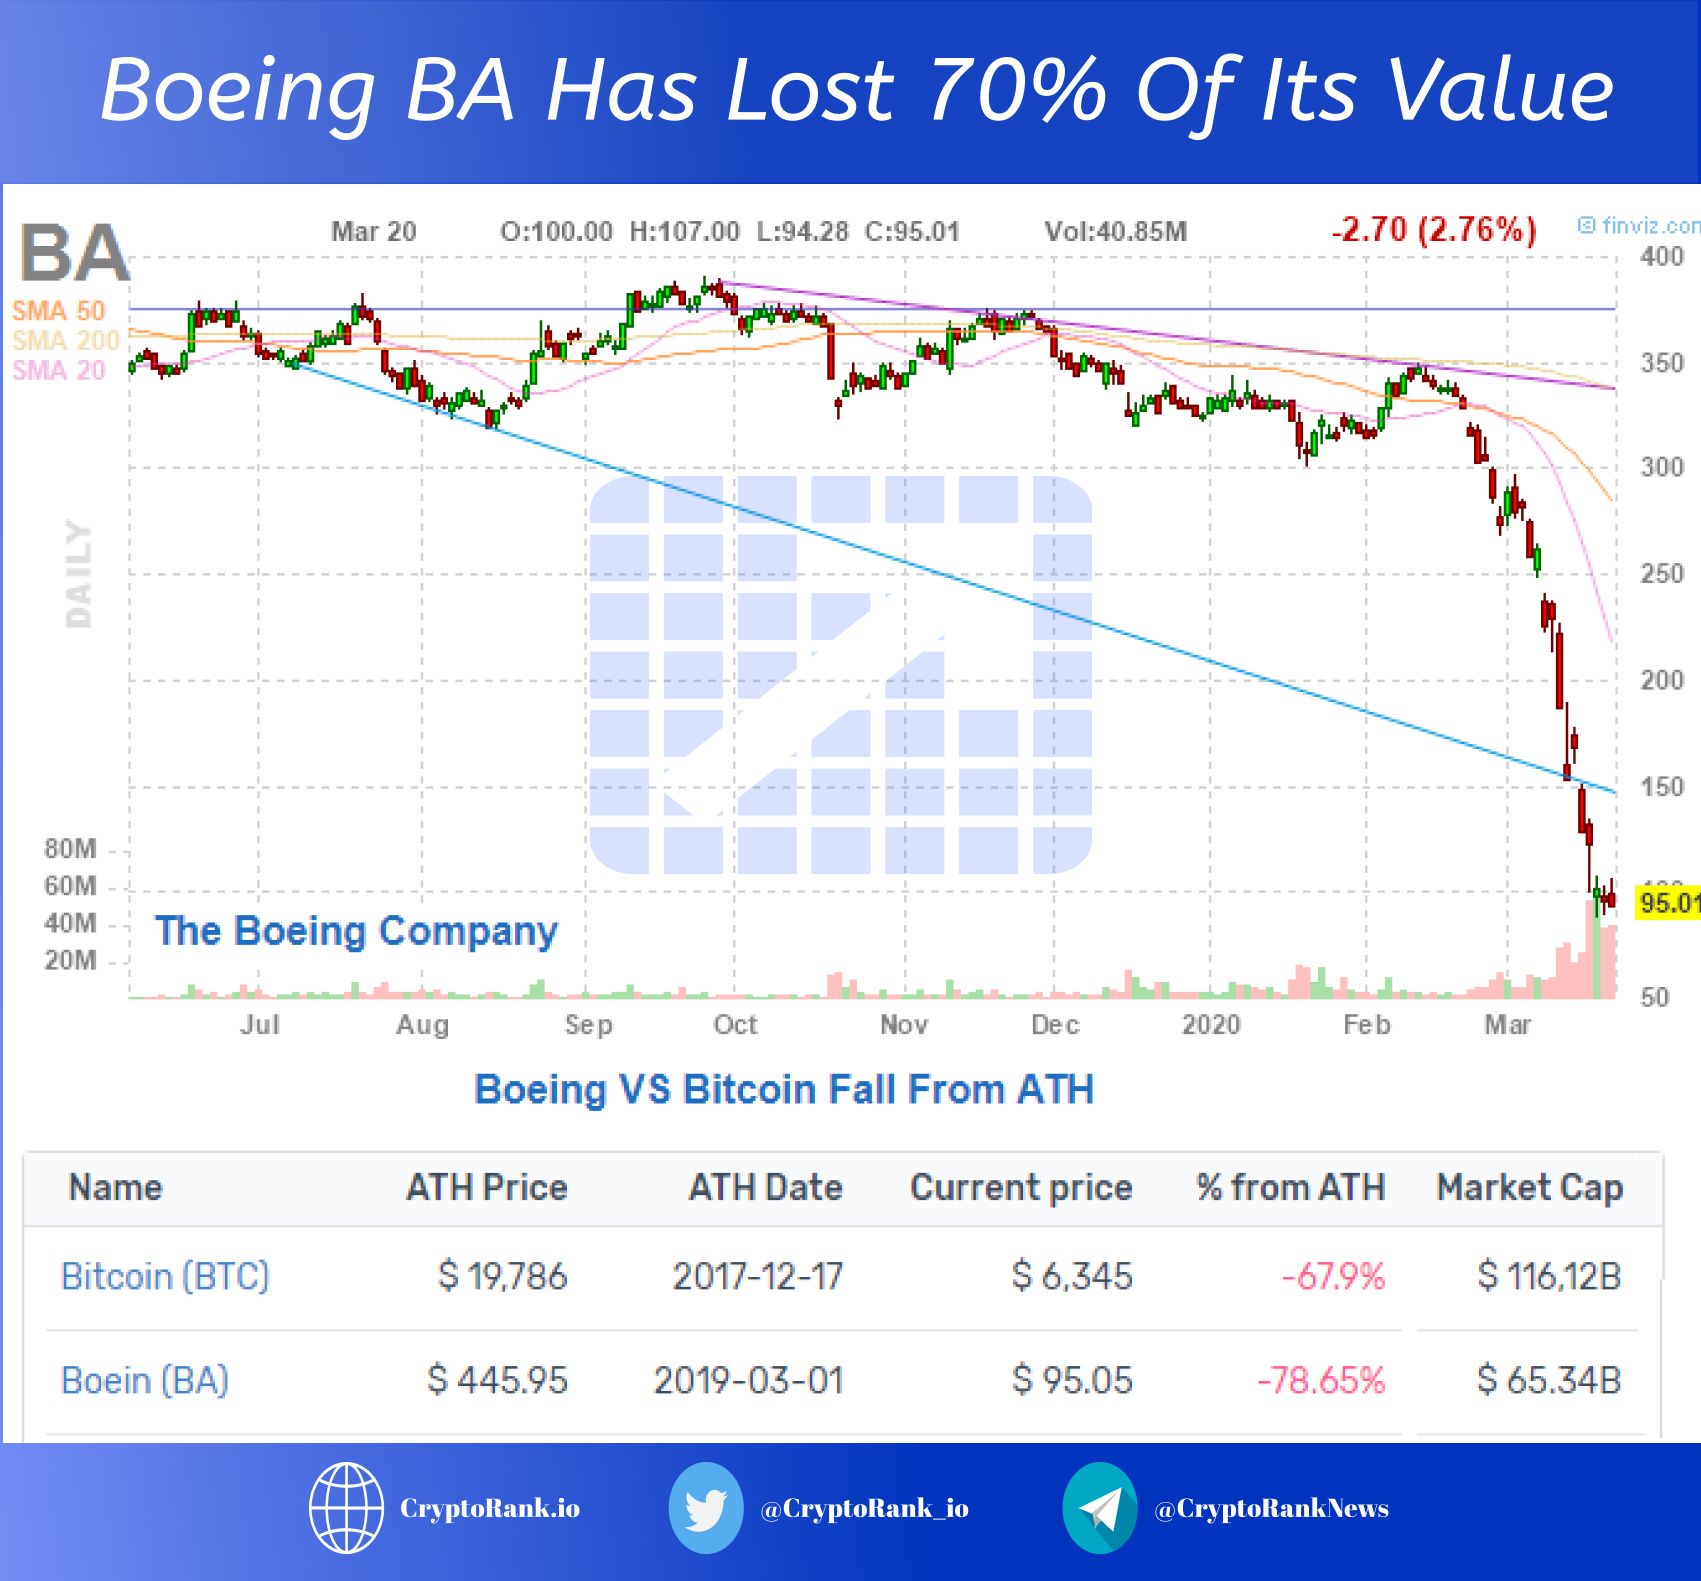 Boeing BA Has Lost 70% Of Its Value